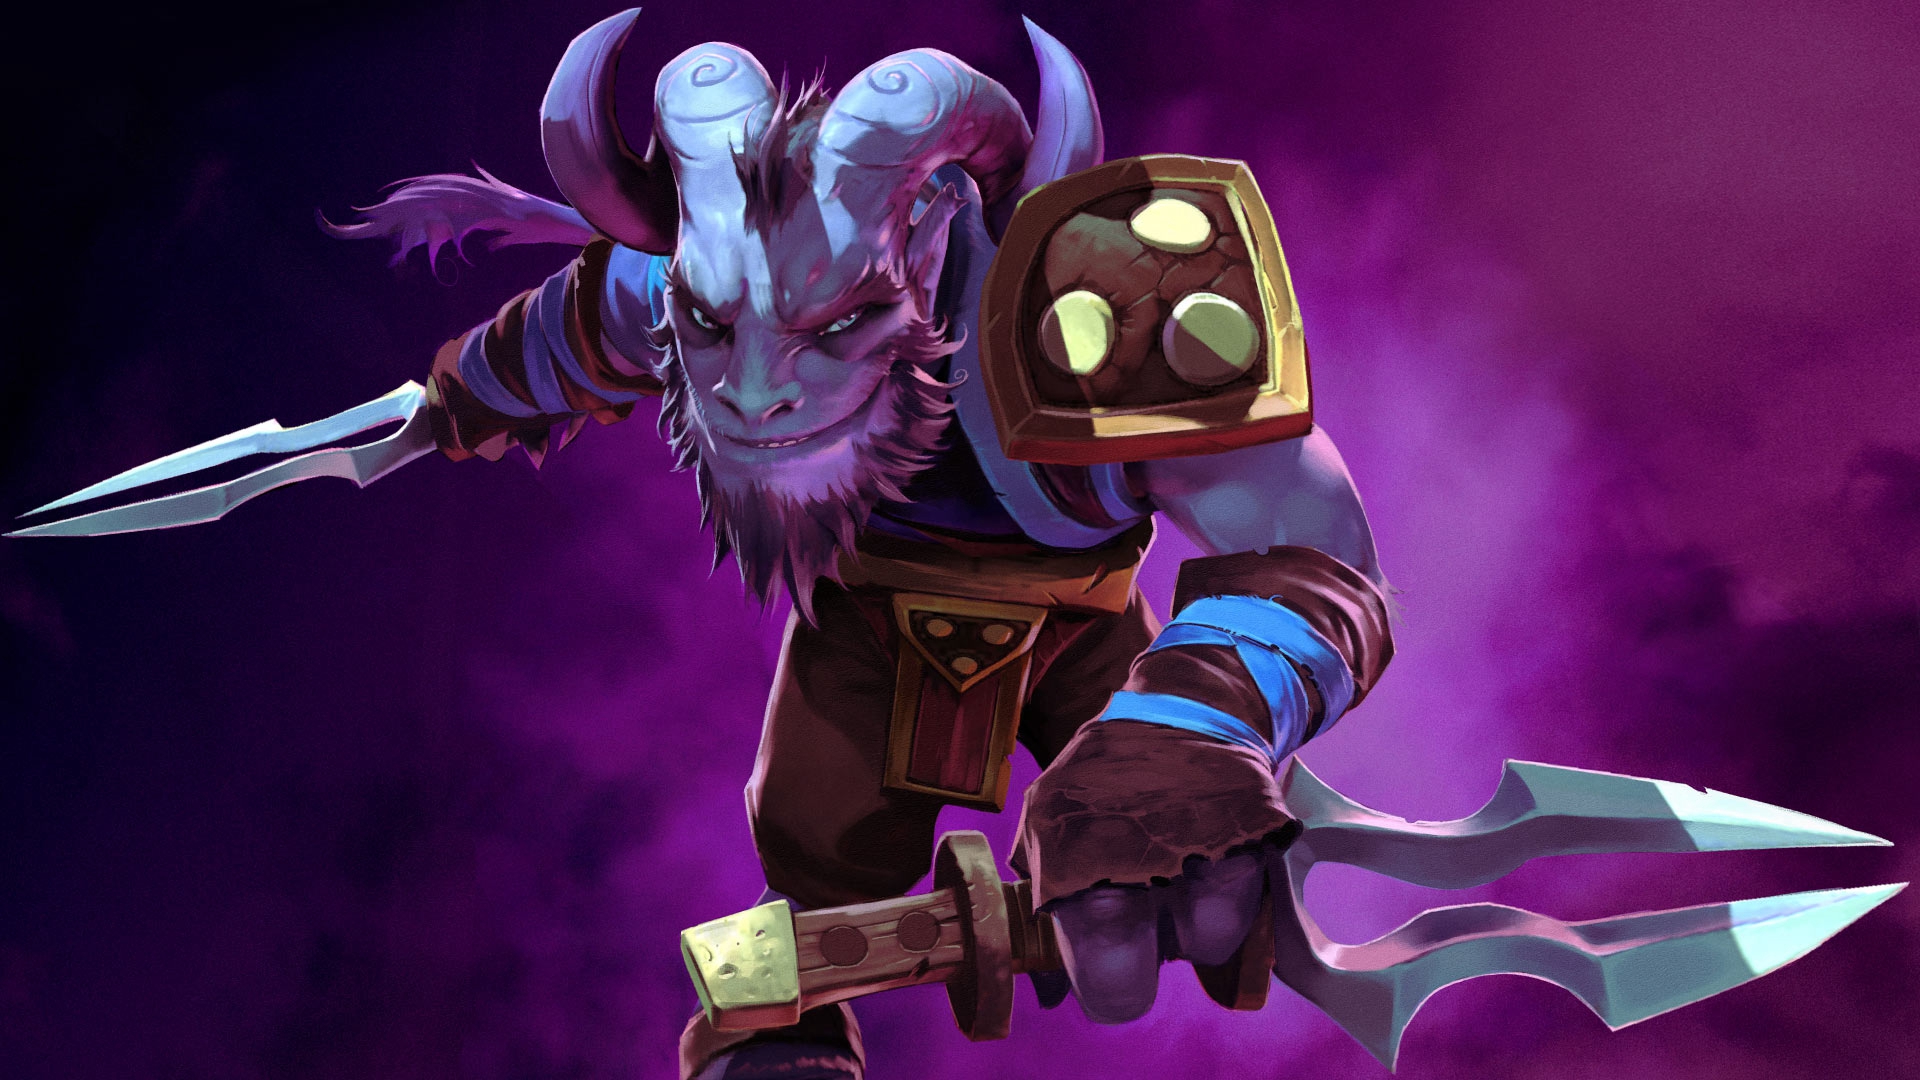 dota 2, sven, the rogue knight Wallpaper, HD Games 4K Wallpapers, Images and Background ...